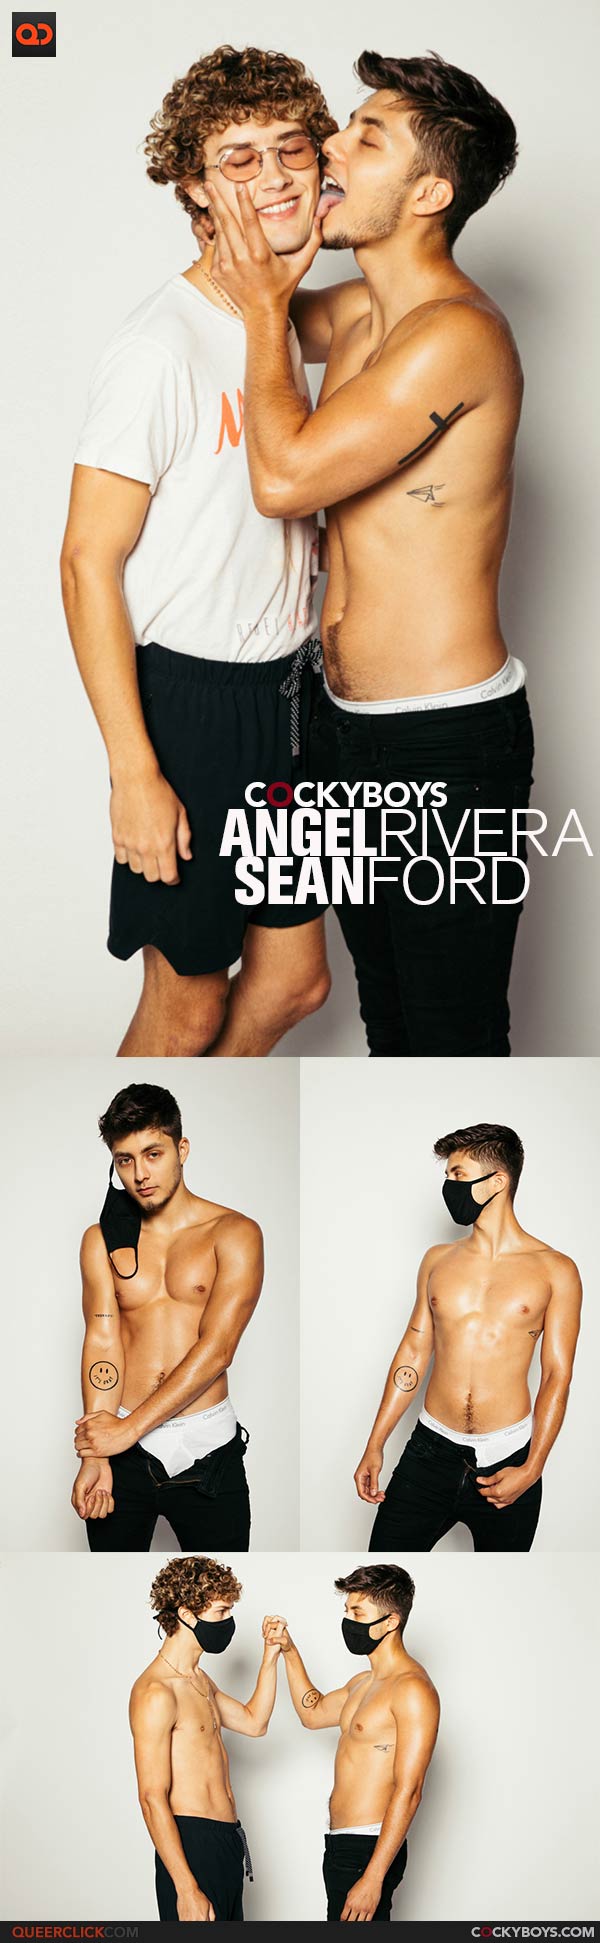 CockyBoys: Angel Rivera Makes his CockyBoys Debut With Sean Ford